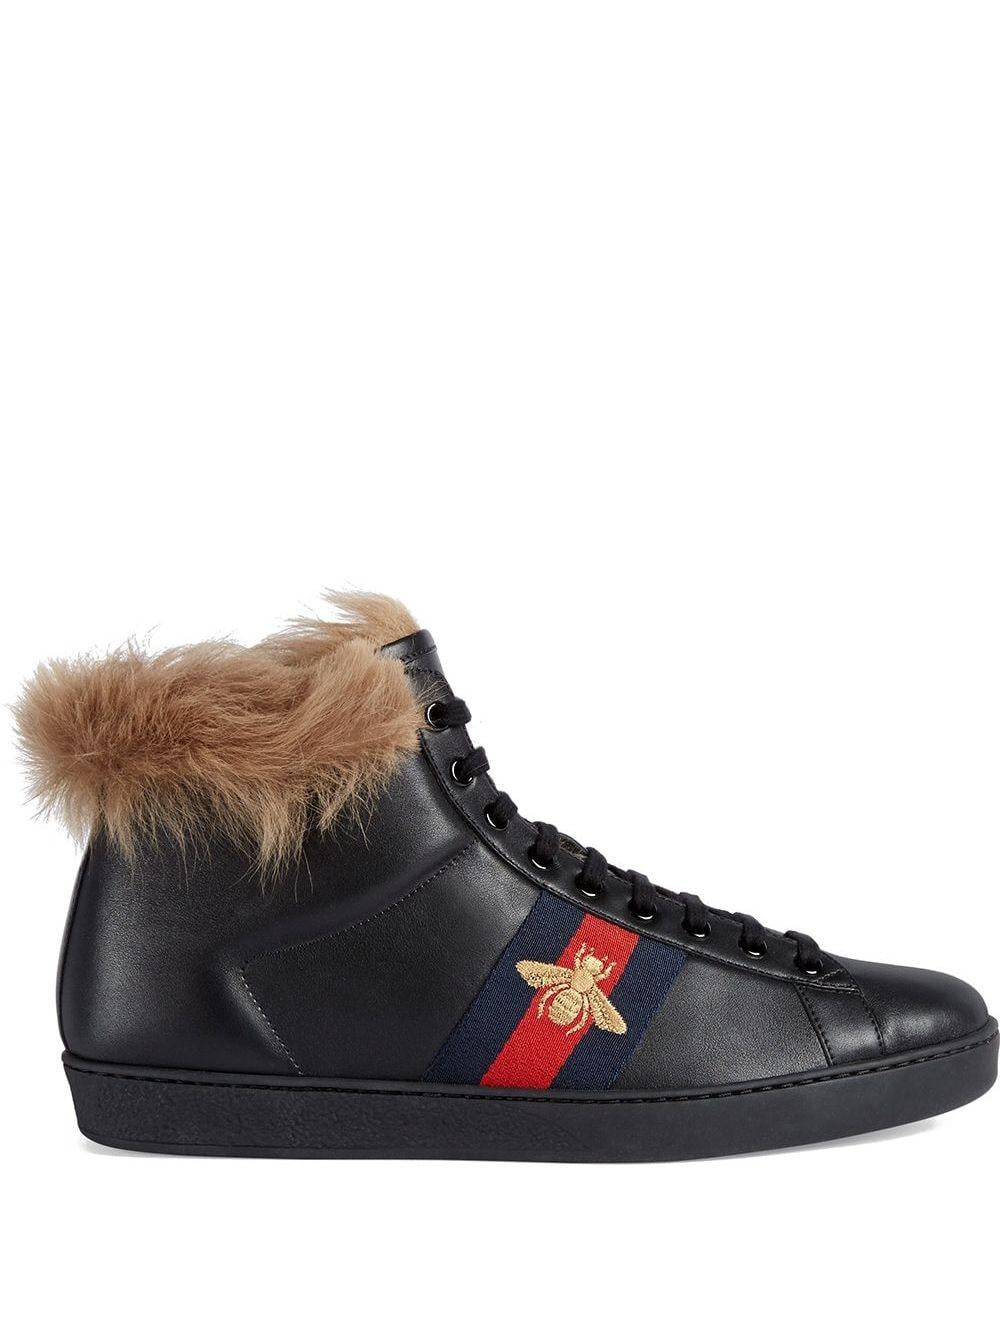 Gucci Ace High-top Sneaker With Fur in Black for Men - Lyst